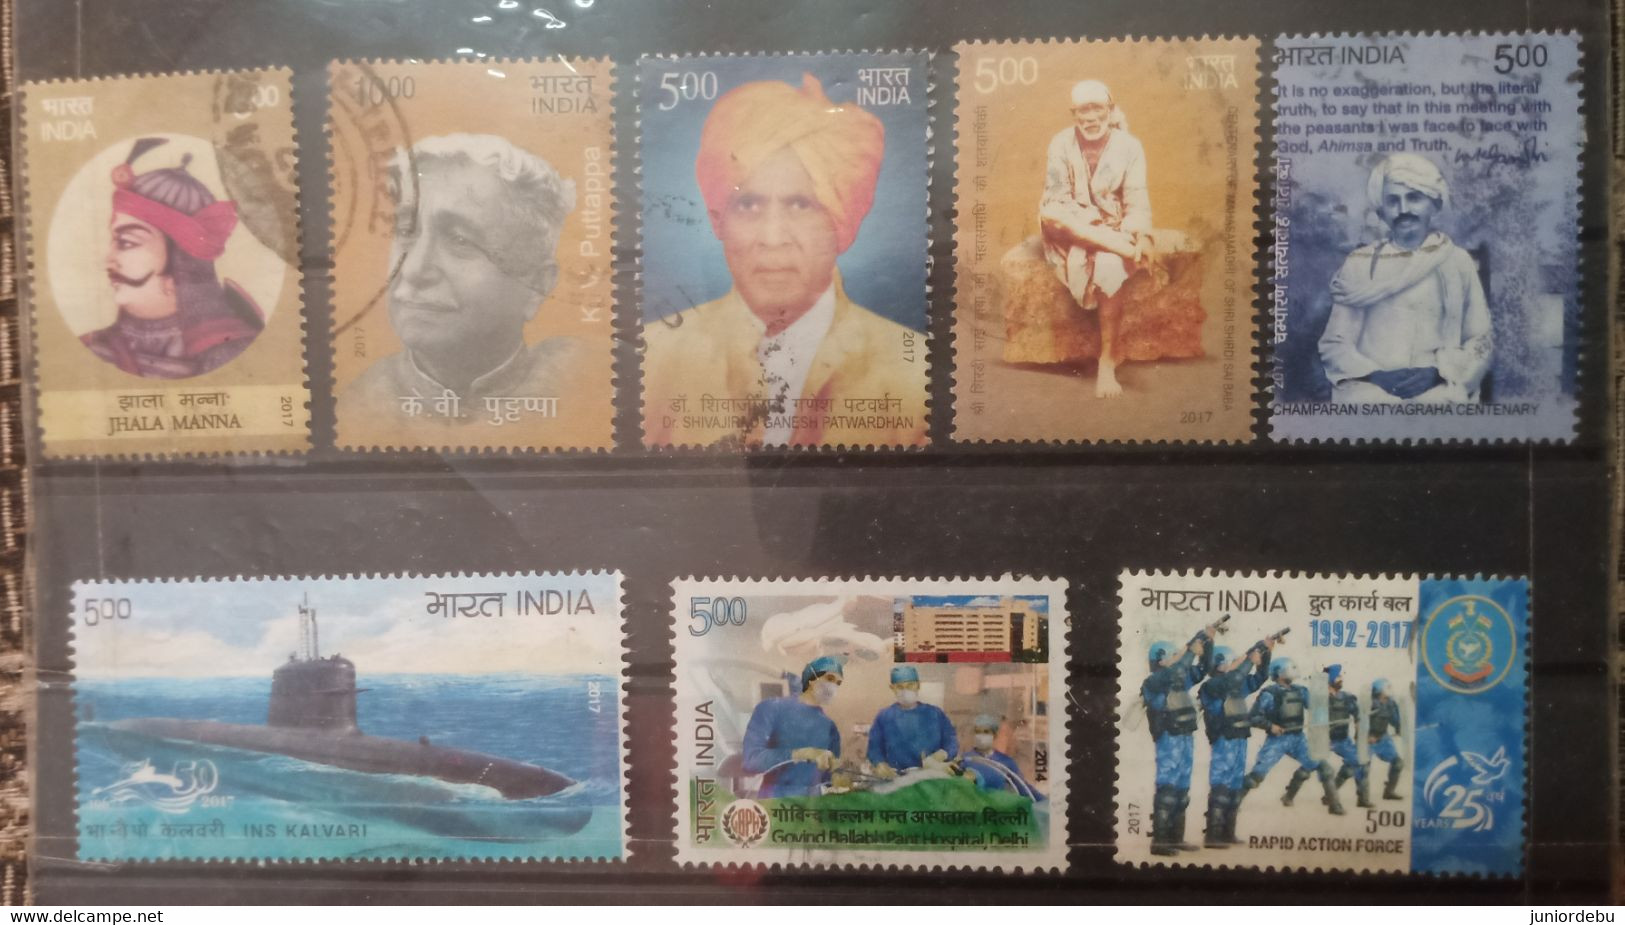 India - 2017 - 8 Different Commemorative Stamps - Used. - Used Stamps